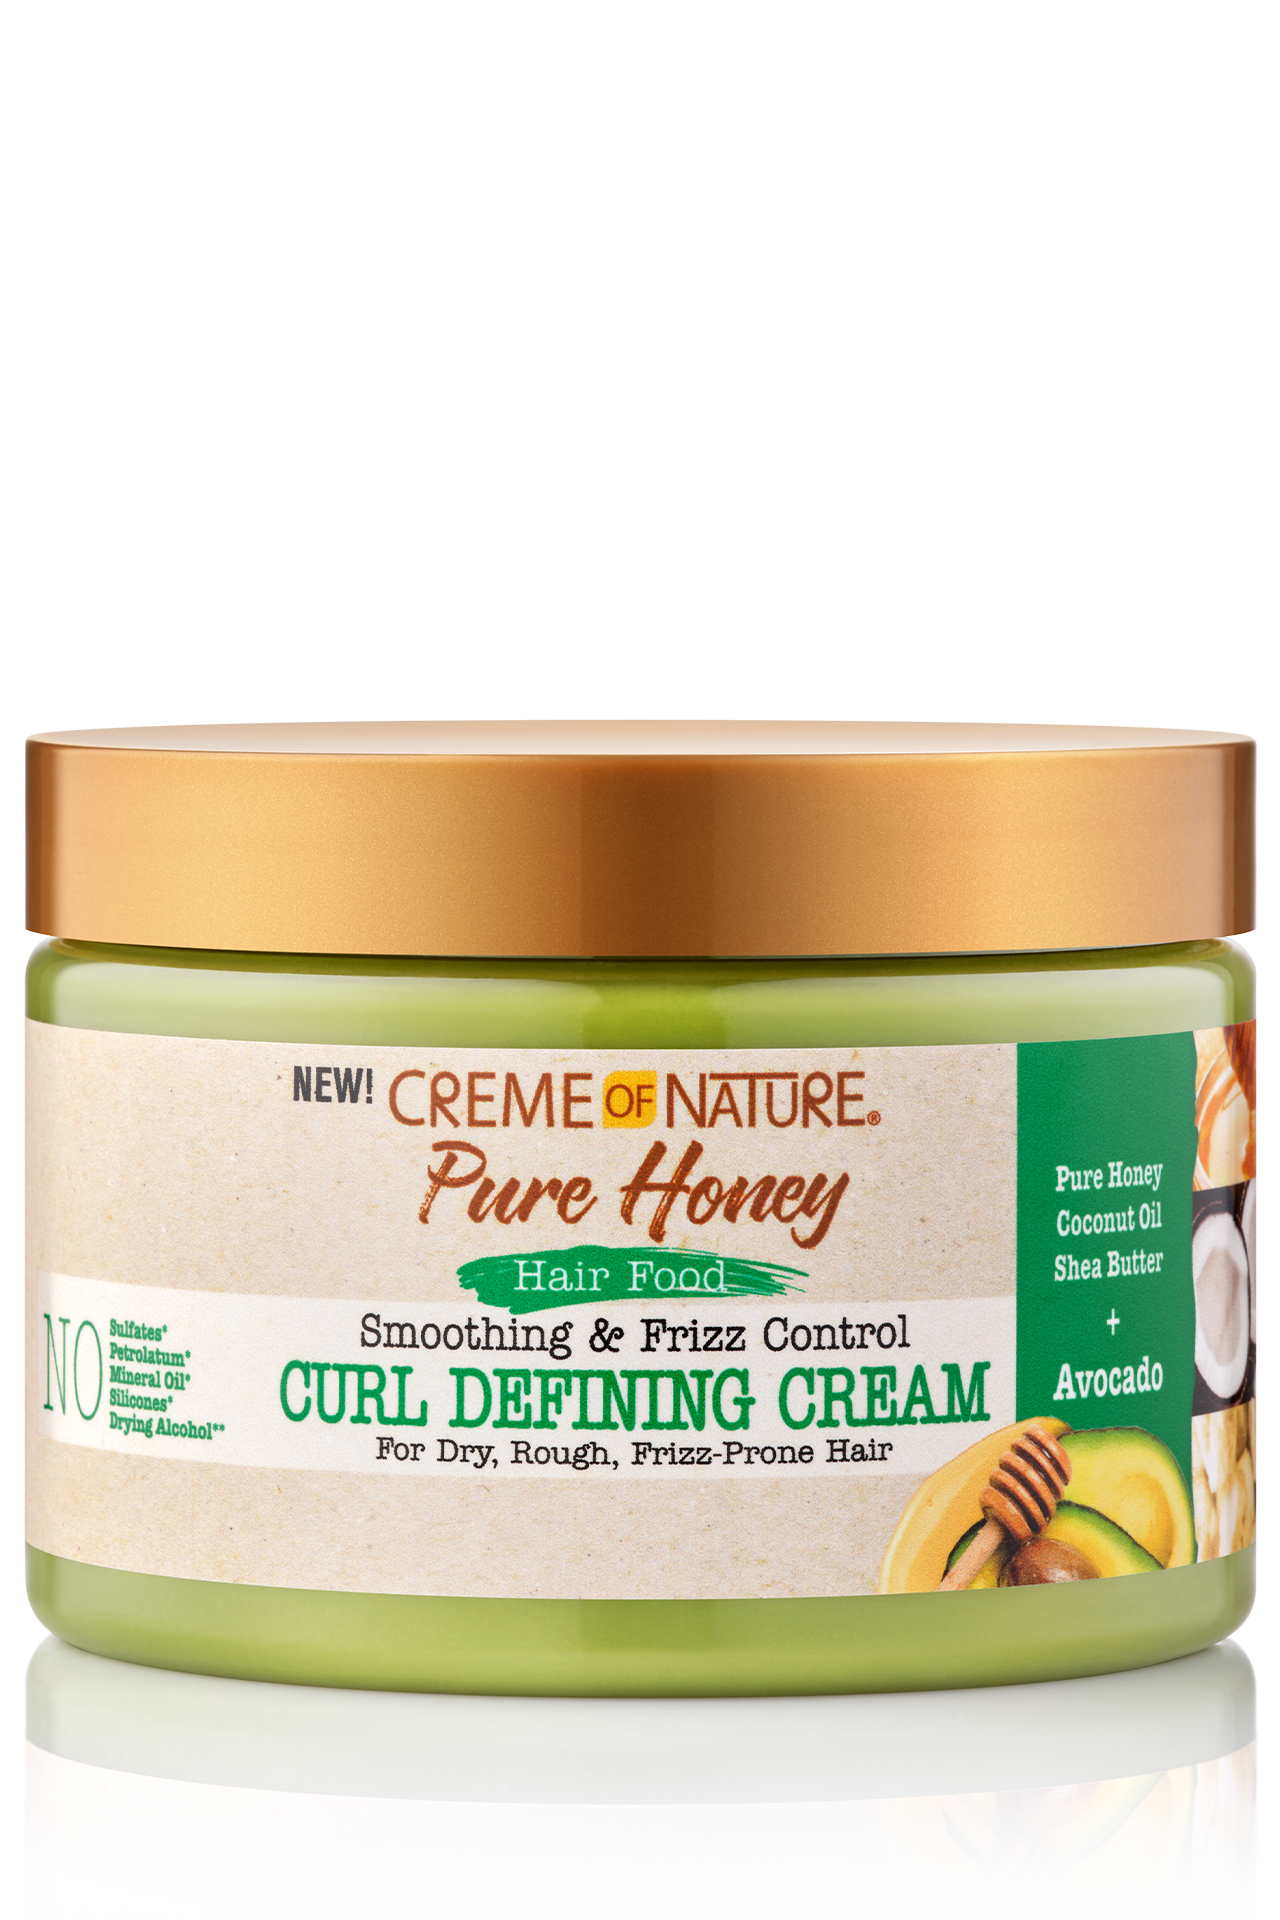 Creme of Nature Pure Honey Smoothing & Frizz Control Curl Defining Cream - 11.5 oz